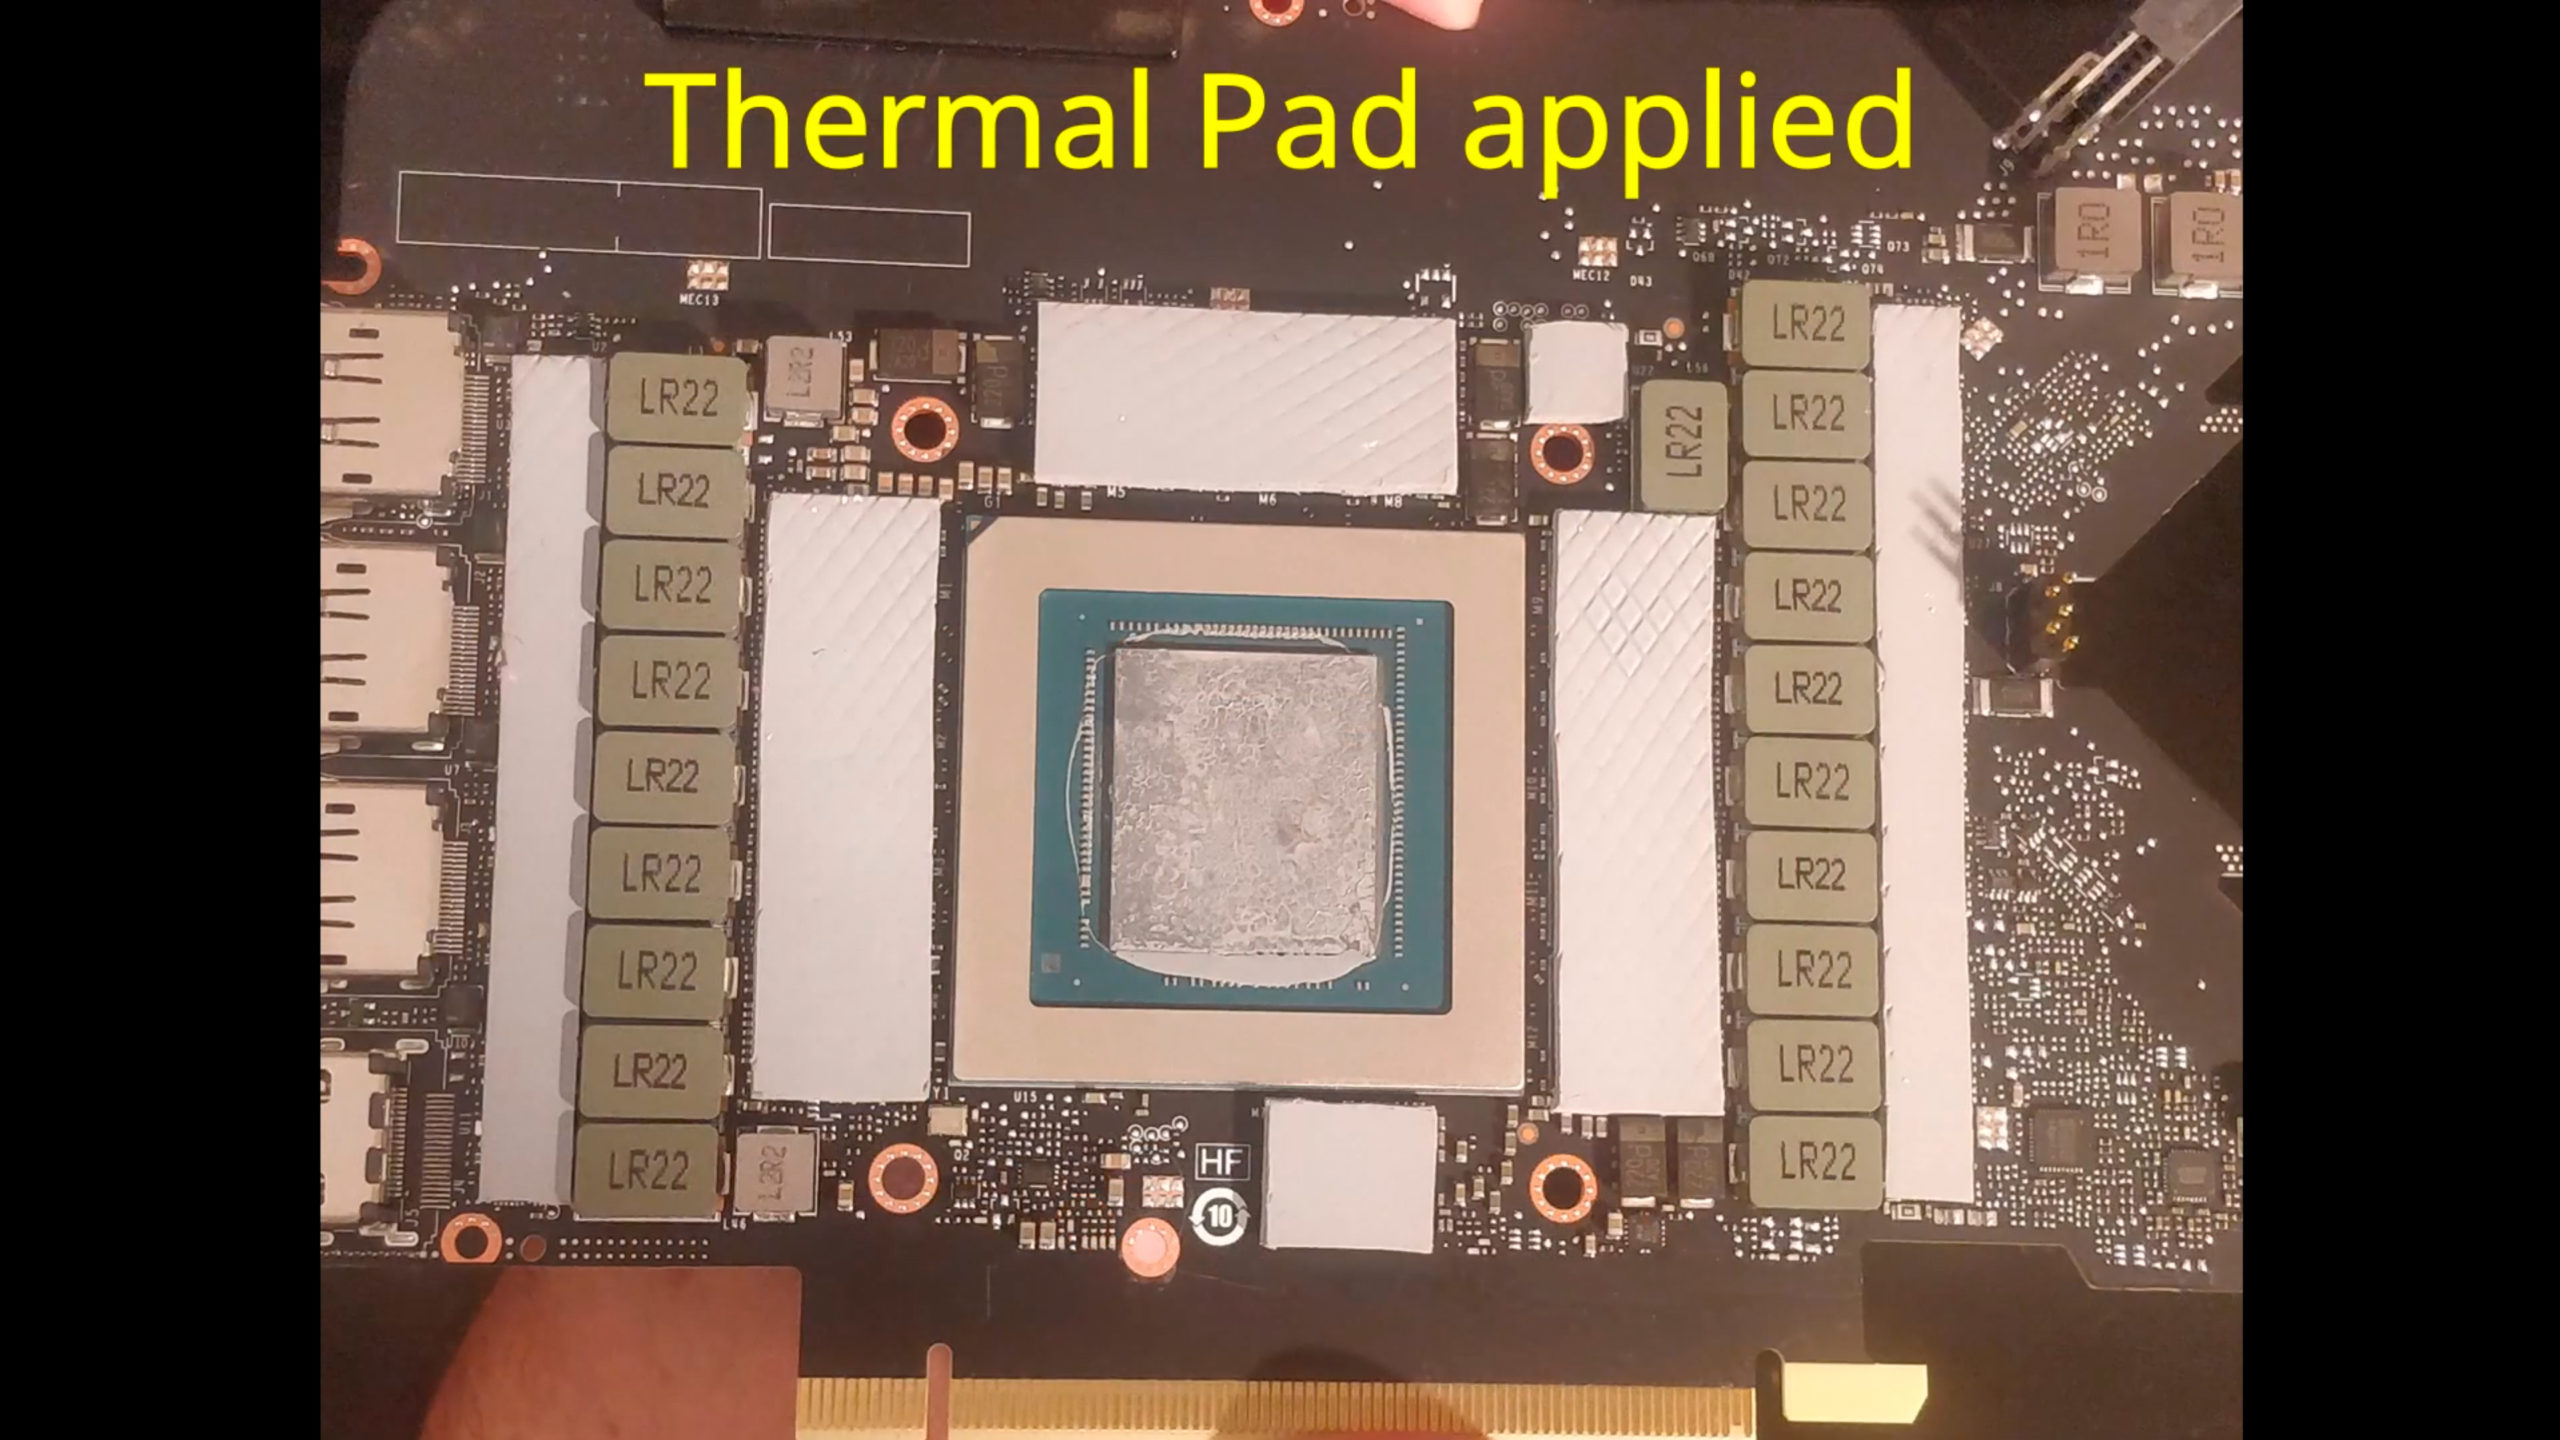 replacing-geforce-rtx-3090-thermal-pads-improves-gddr6x-temps-by-25c